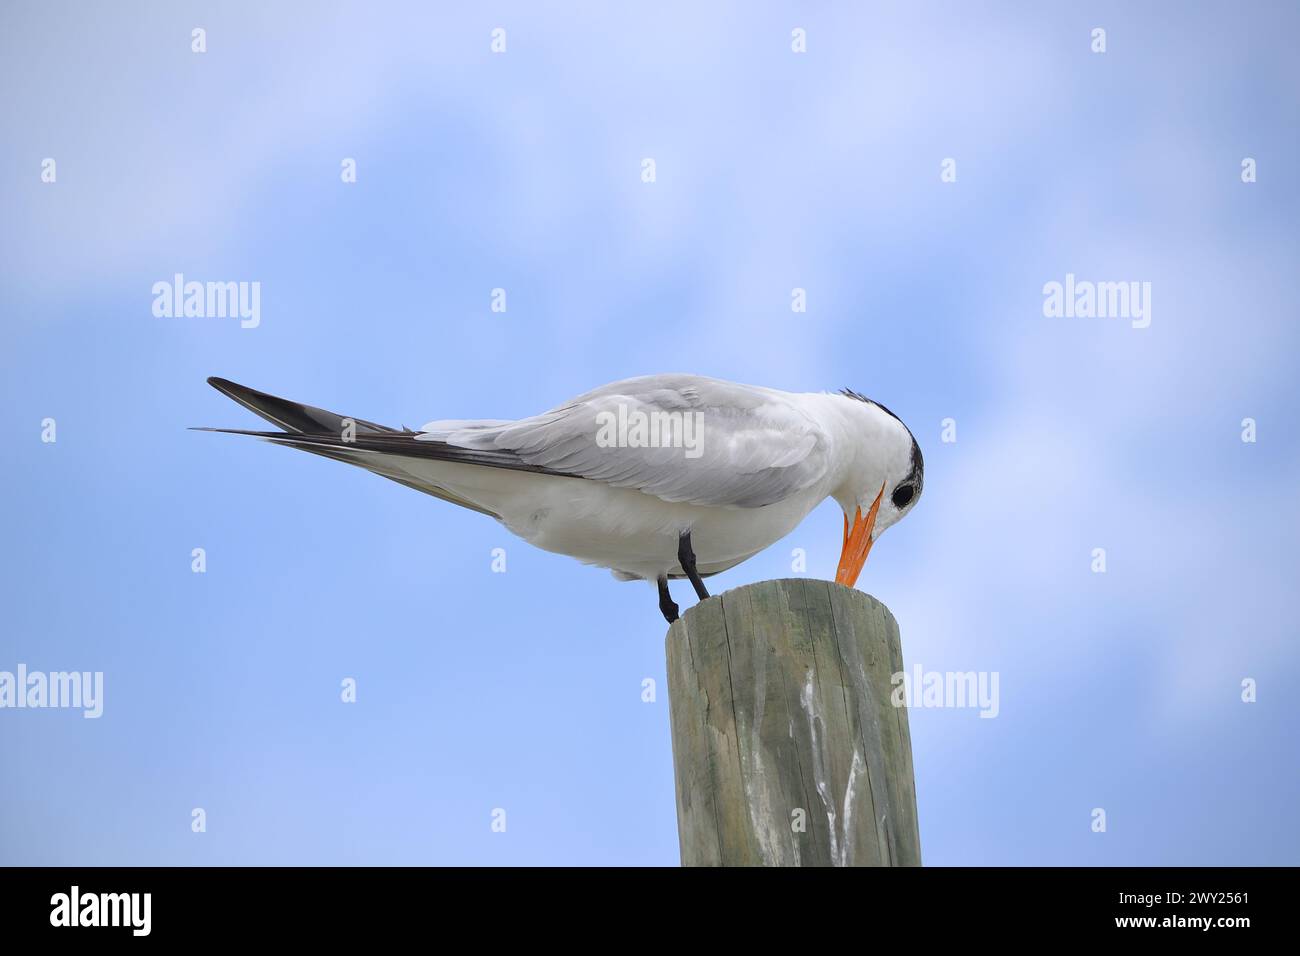 A Royal Tern perches atop a wooden pole piling, its head and beak tilted downward against the backdrop of a hazy, clouded sky at Ponce Inlet, Beach FL Stock Photo